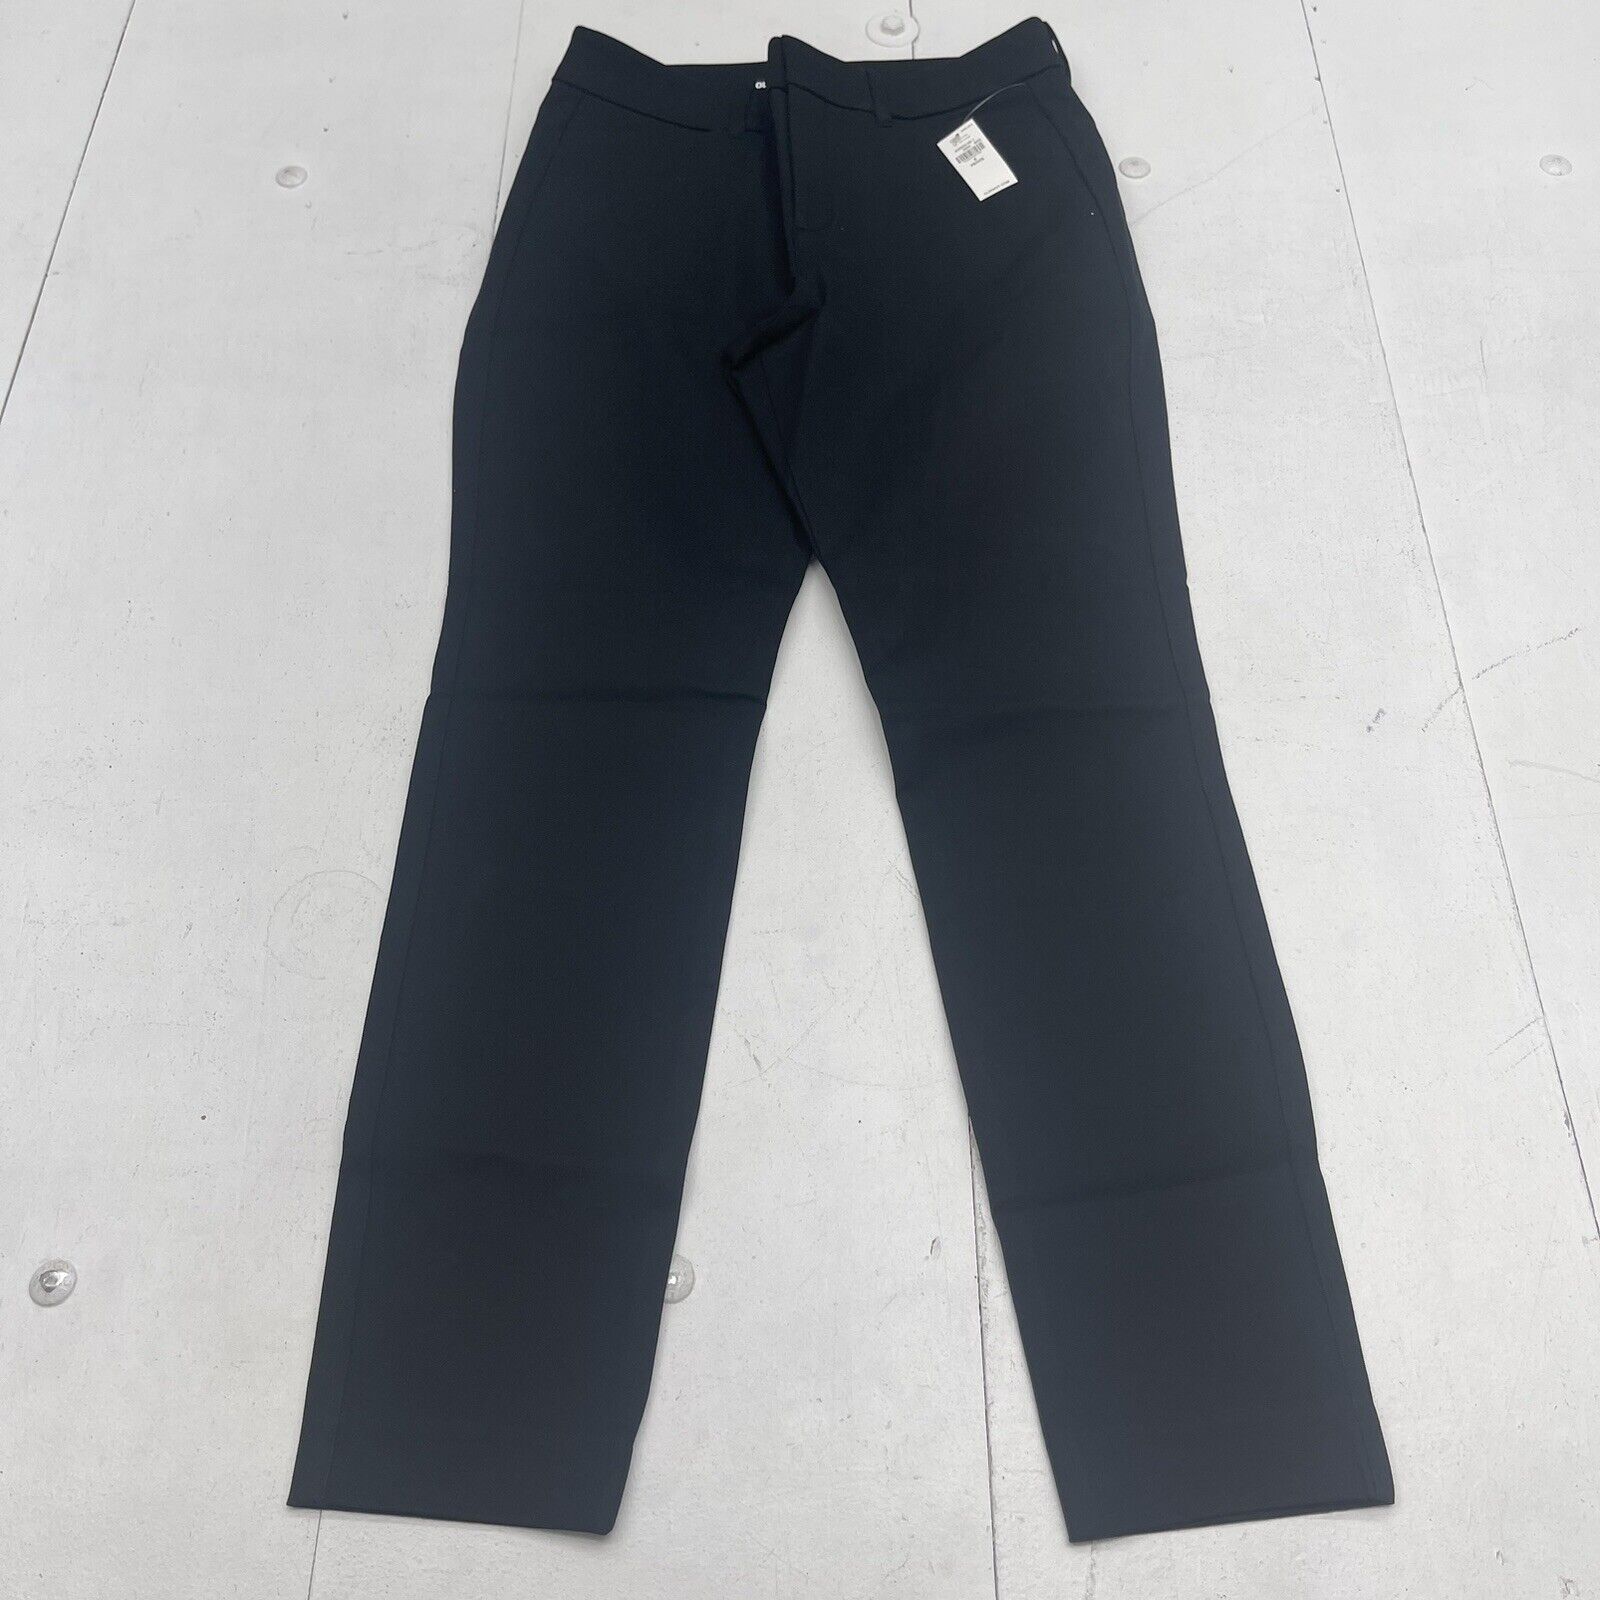 Old Navy High Waisted Pixie Skinny Ankle Pants Black Women's